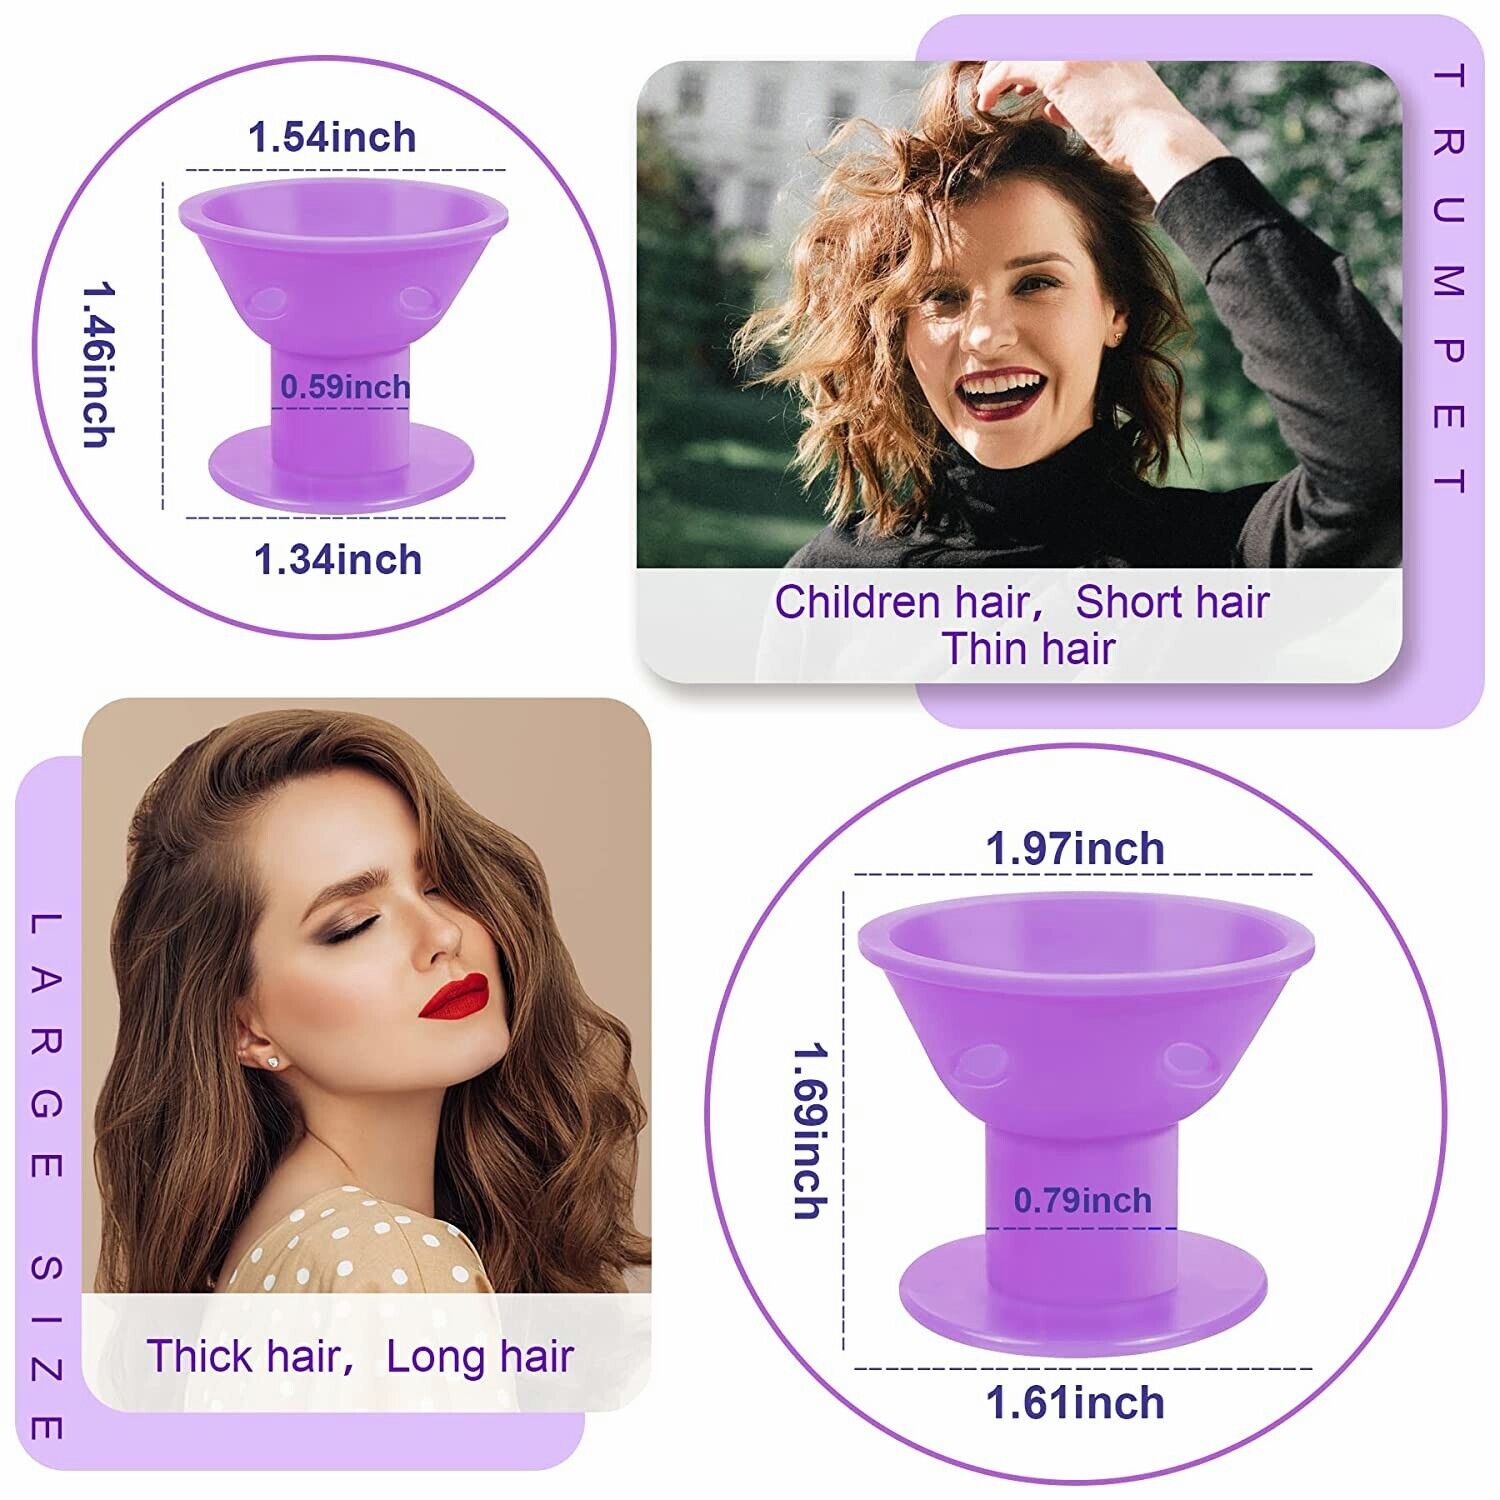 35PCS Magic Hair Curlers Rollers Heatless Silicone DIY Formers Styling Tool US Unbranded Does Not Apply - фотография #9